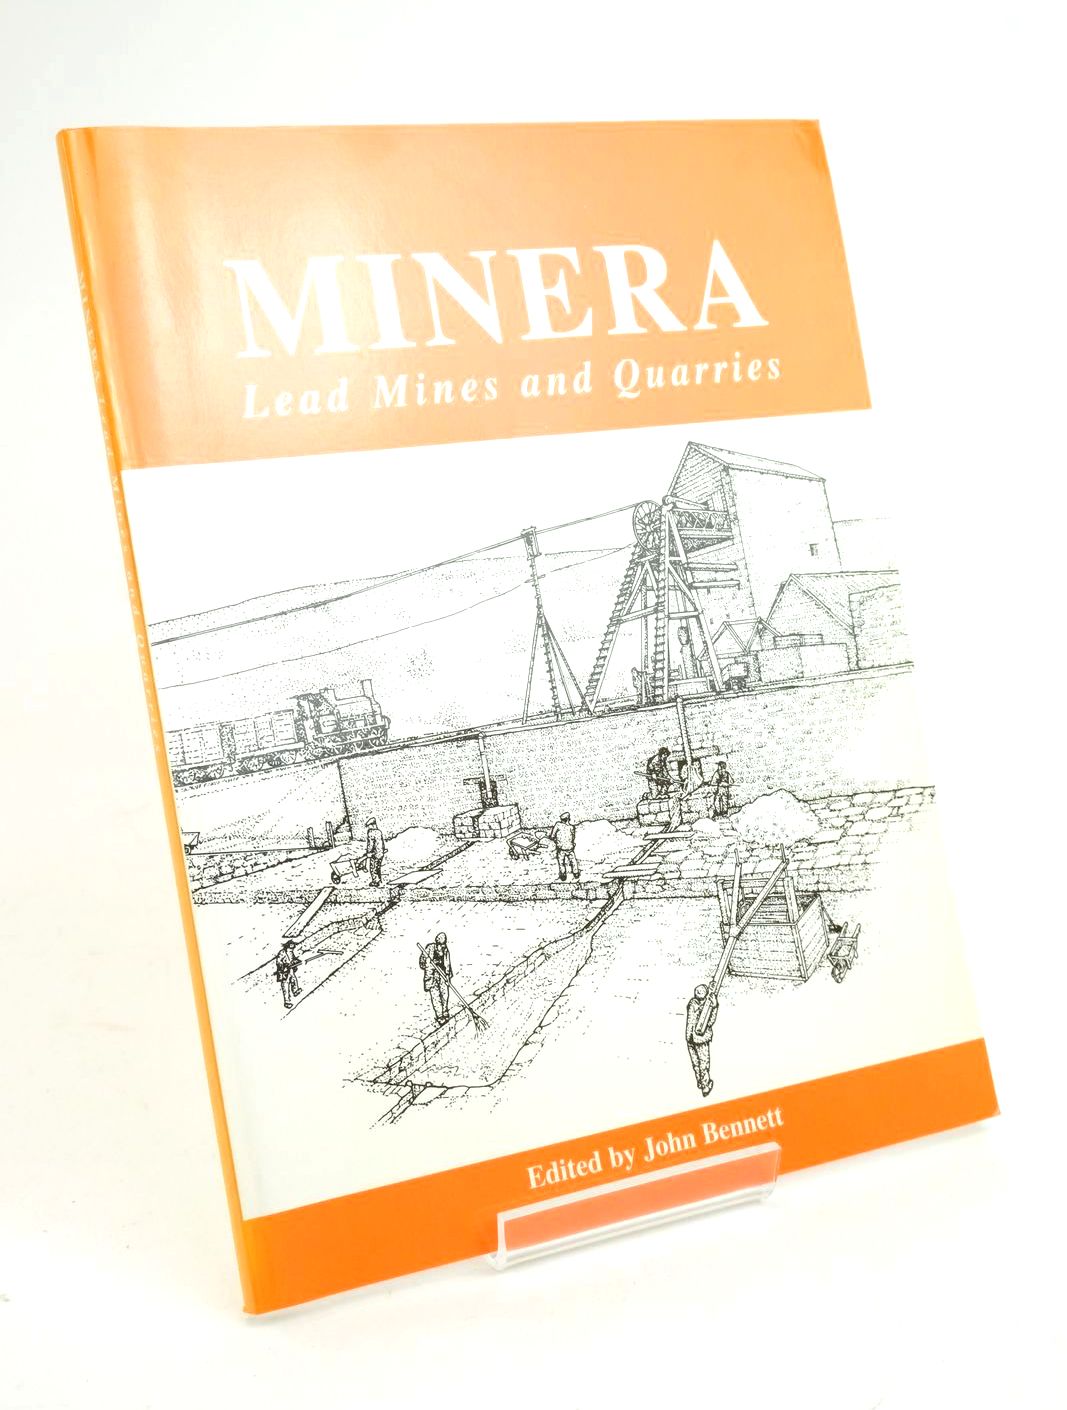 Photo of INDUSTRIAL MINERA - THE LEAD MINES AND QUARRIES OF MINERA- Stock Number: 1322430